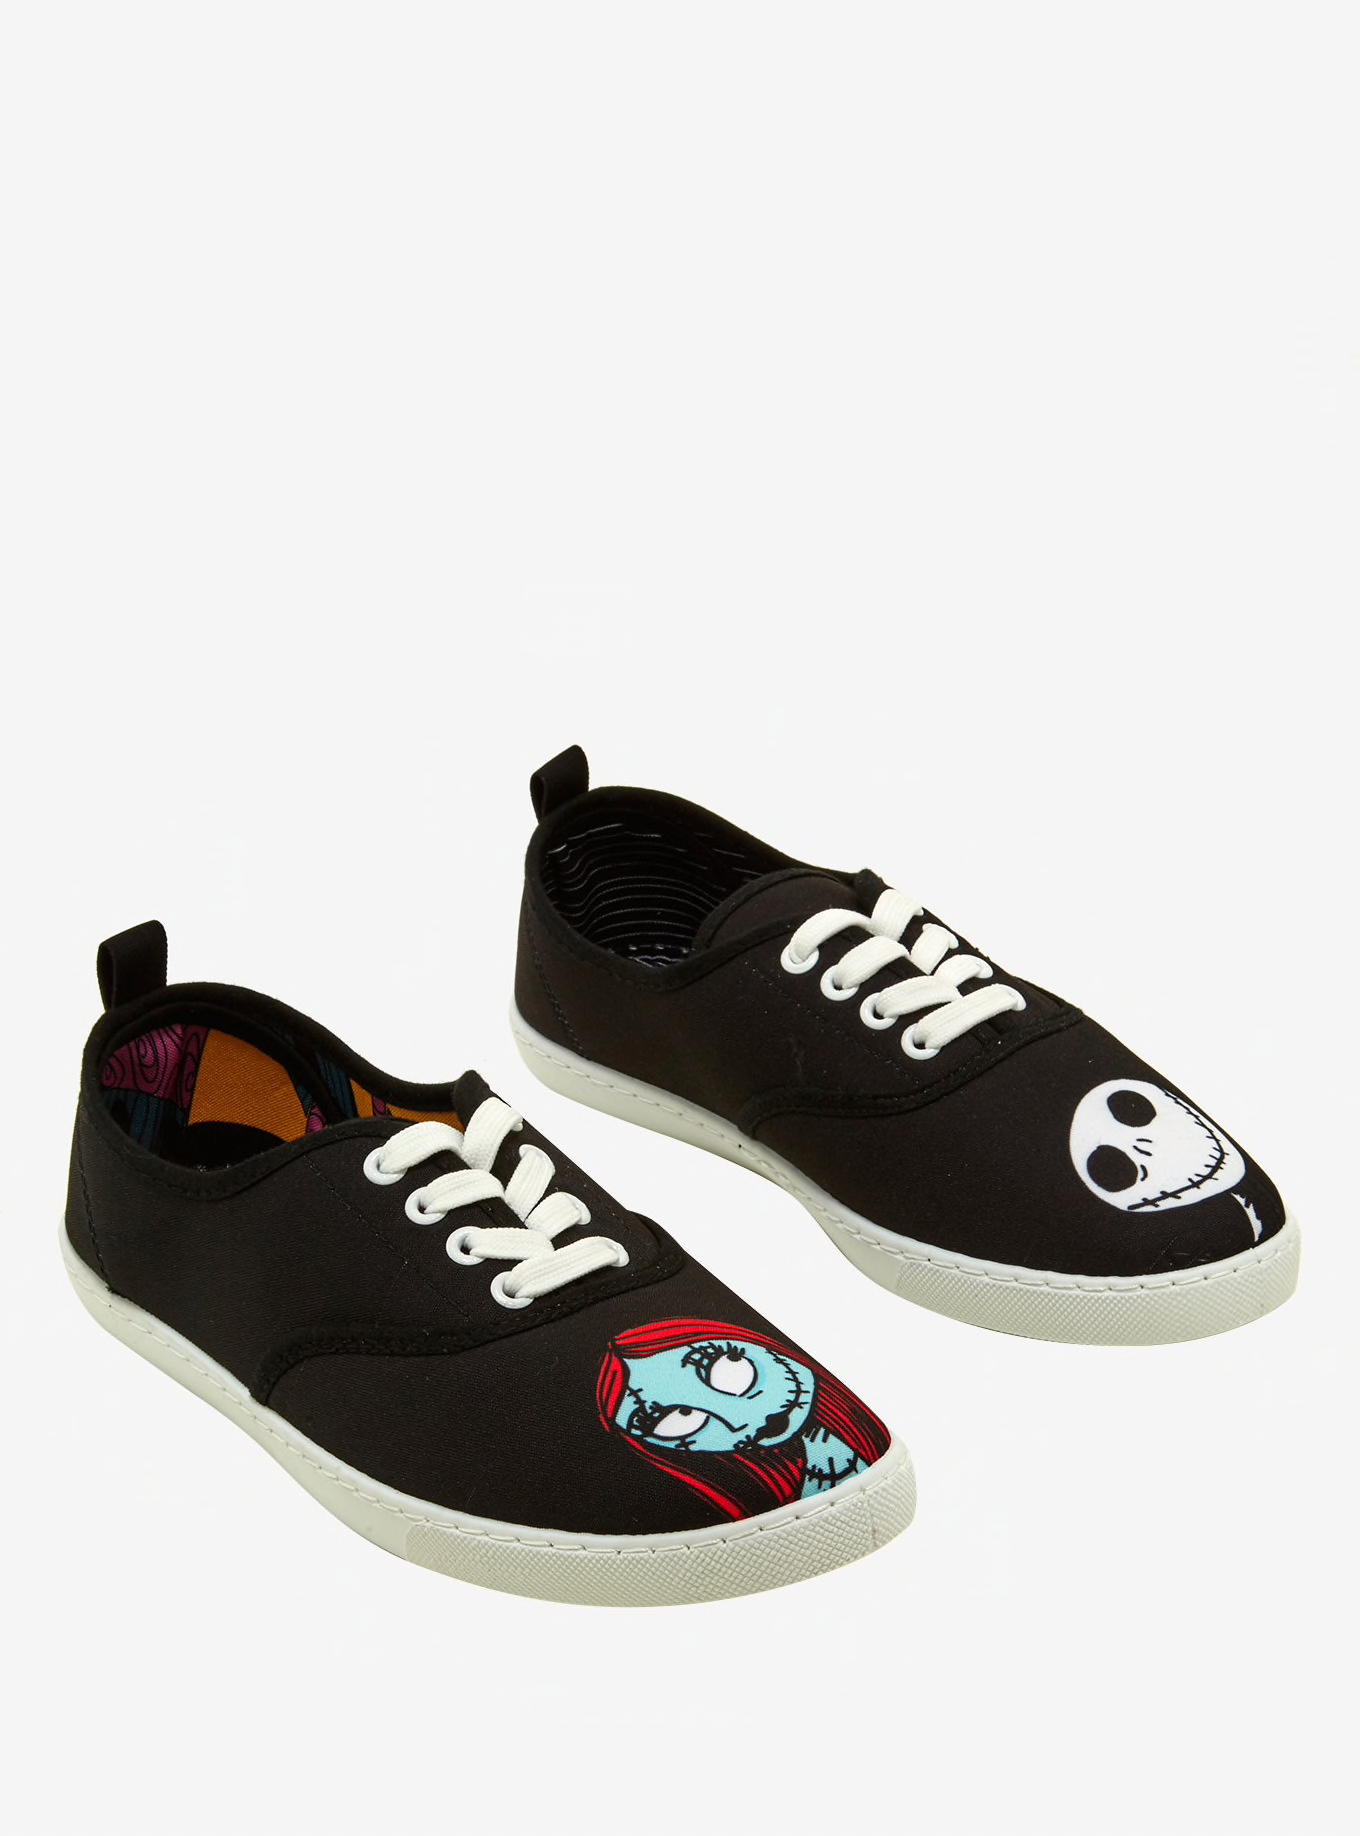 THE NIGHTMARE BEFORE CHRISTMAS SALLY &amp; JACK LACE-UP SNEAKERS